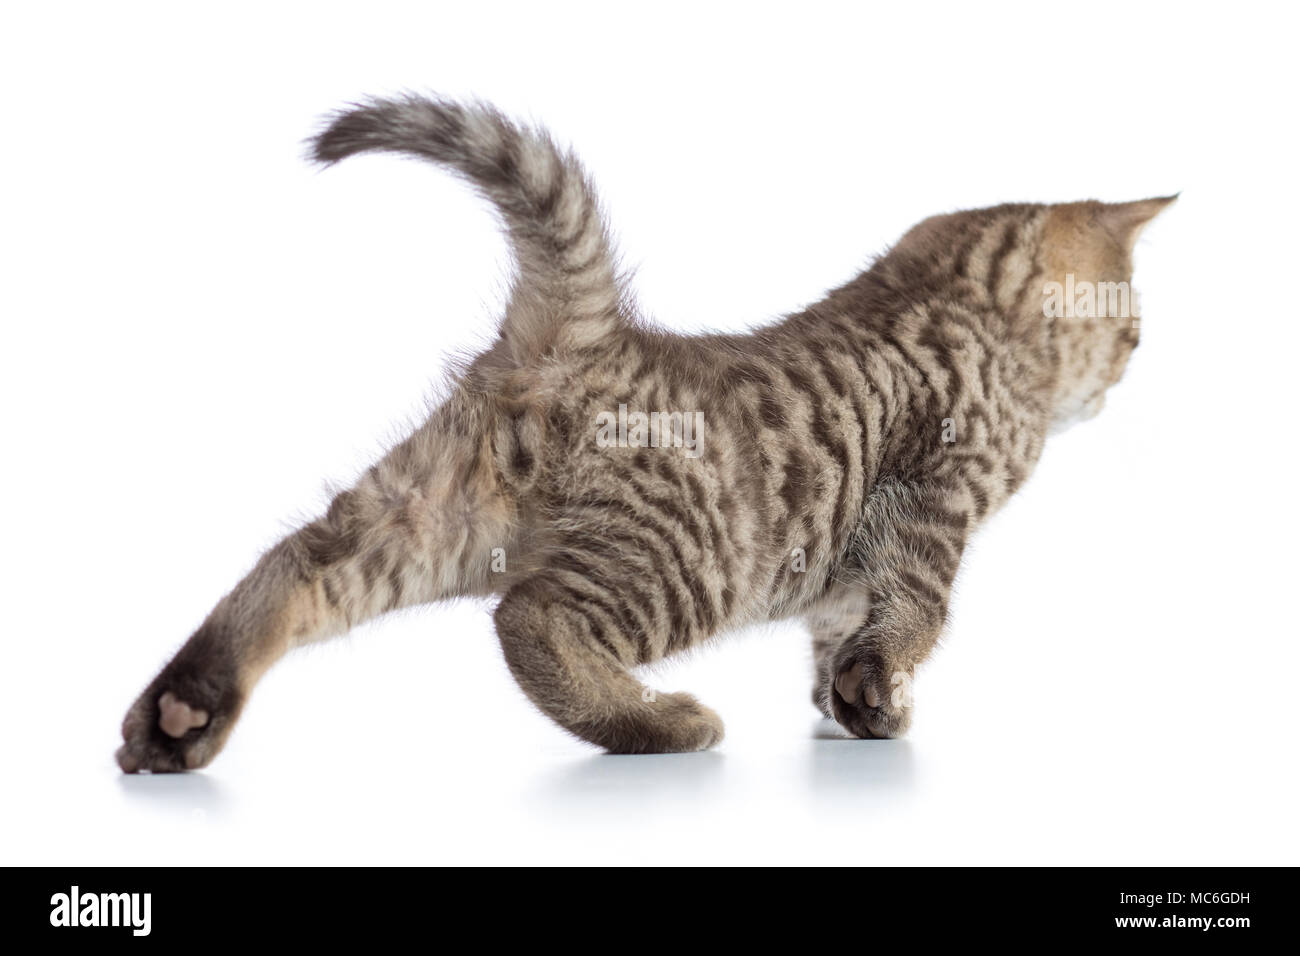 Cute tabby cat kitten stretching on white background Stock Photo